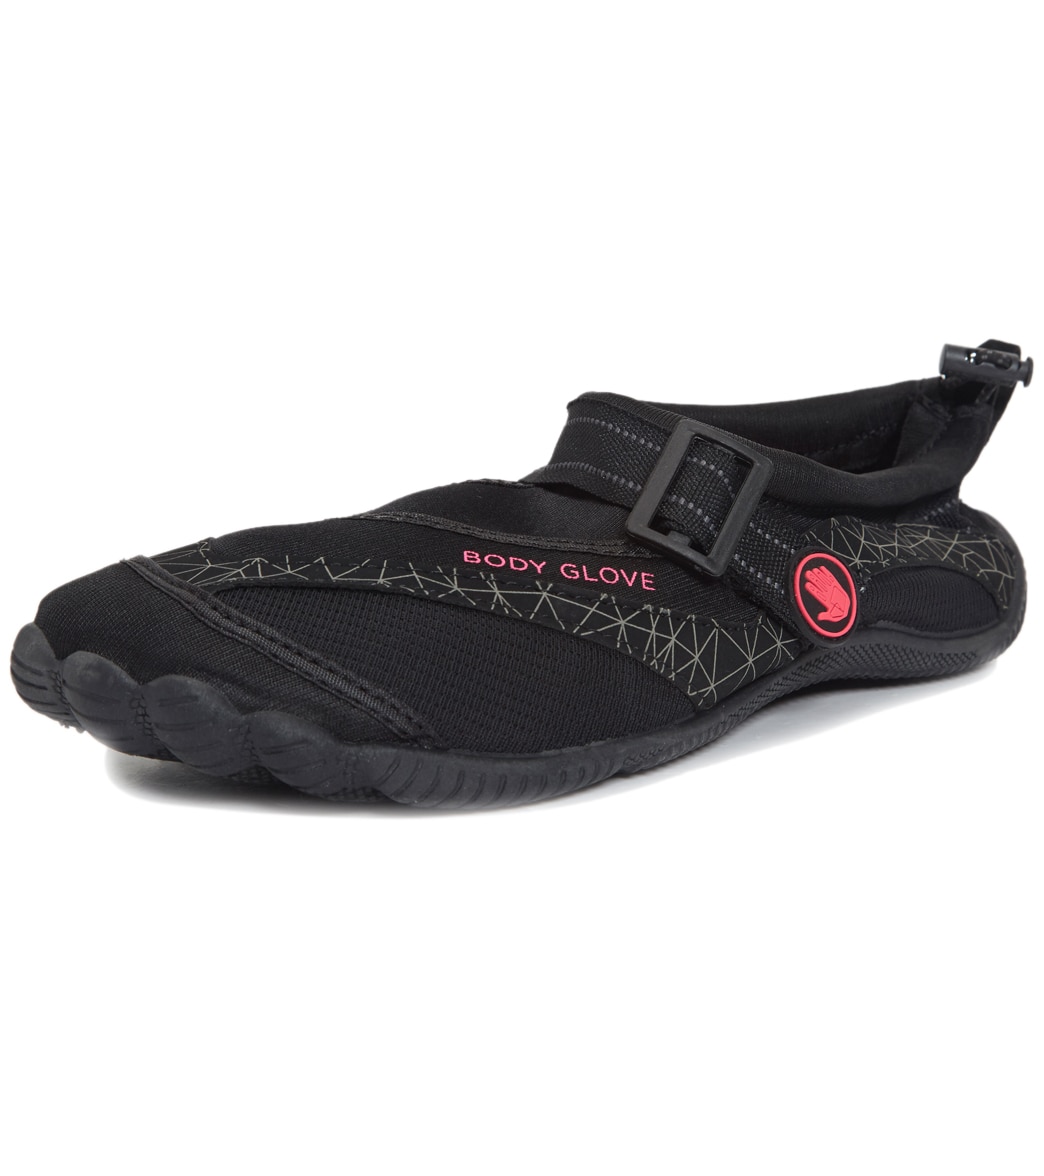 Body Glove Women's Realm Water Shoe at SwimOutlet.com